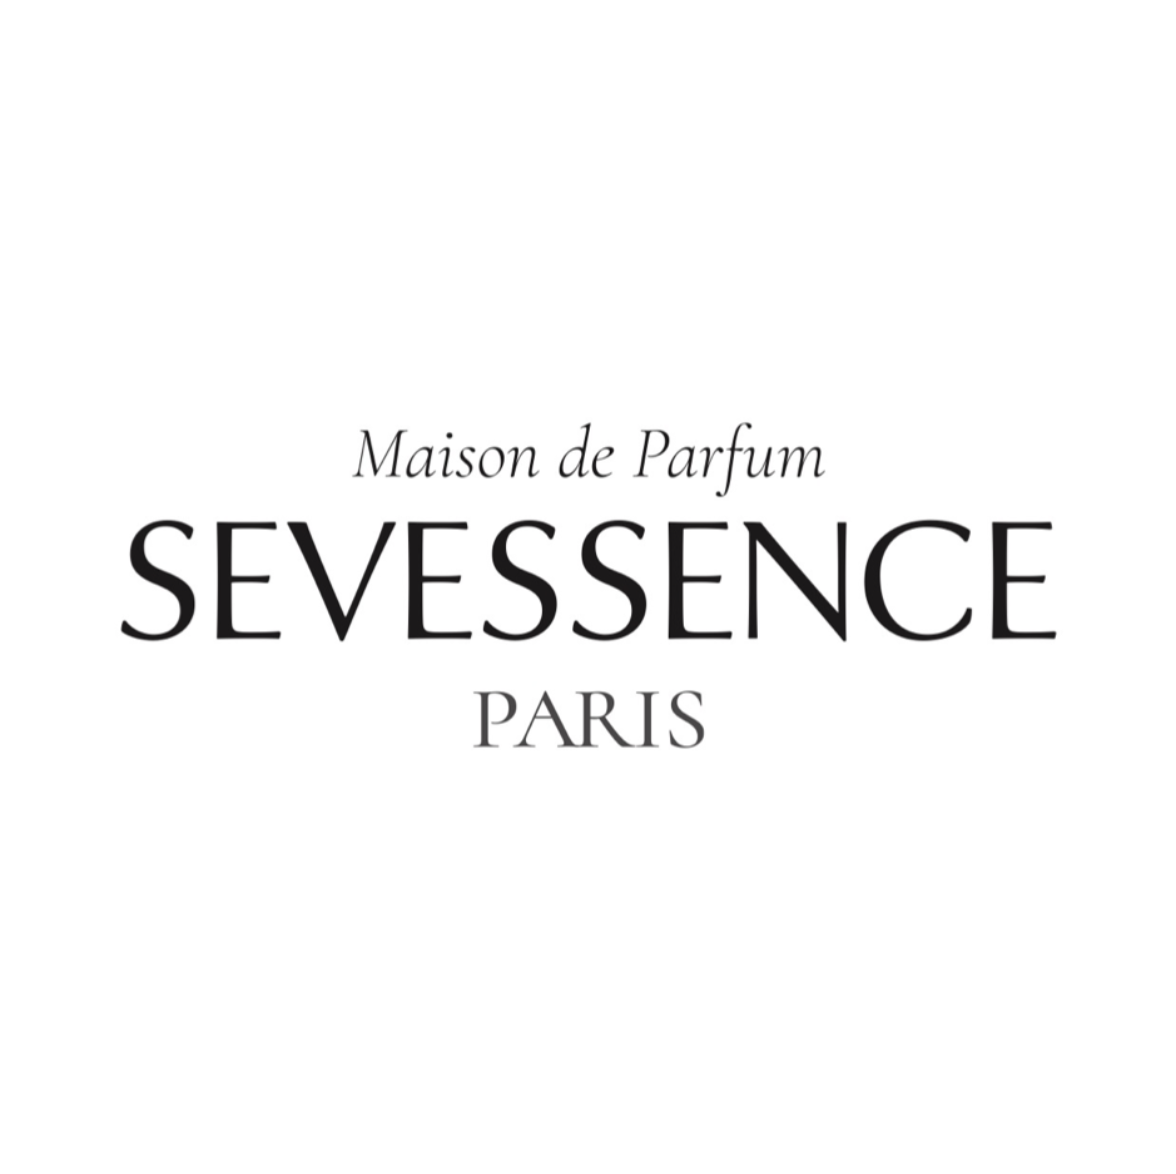 Sevessence organic and allergen-free perfumes